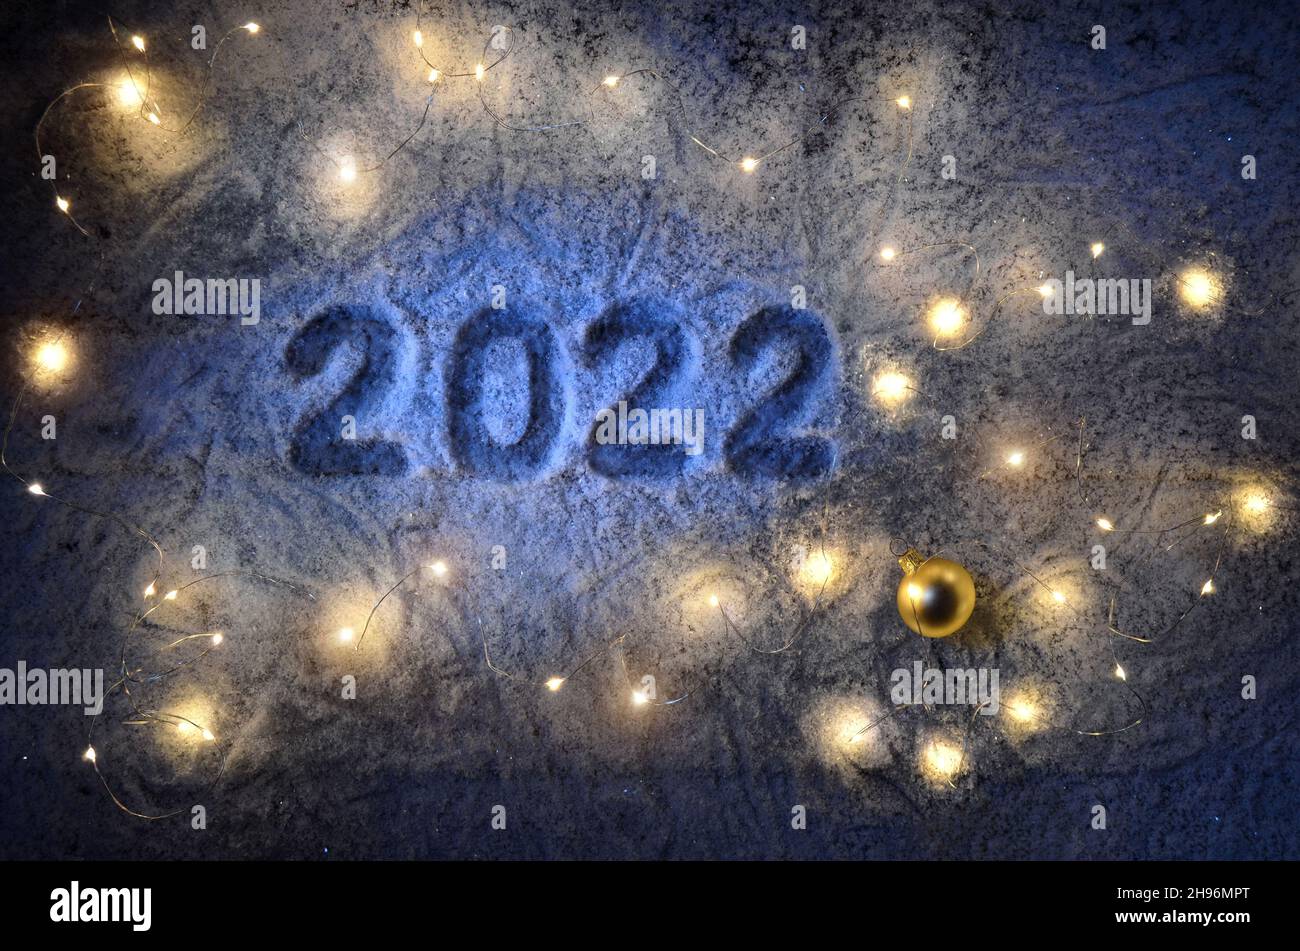 Inscription about the new year 2022 on the snow in winter with christmas lights. Happy New Year greetings concept. Stock Photo